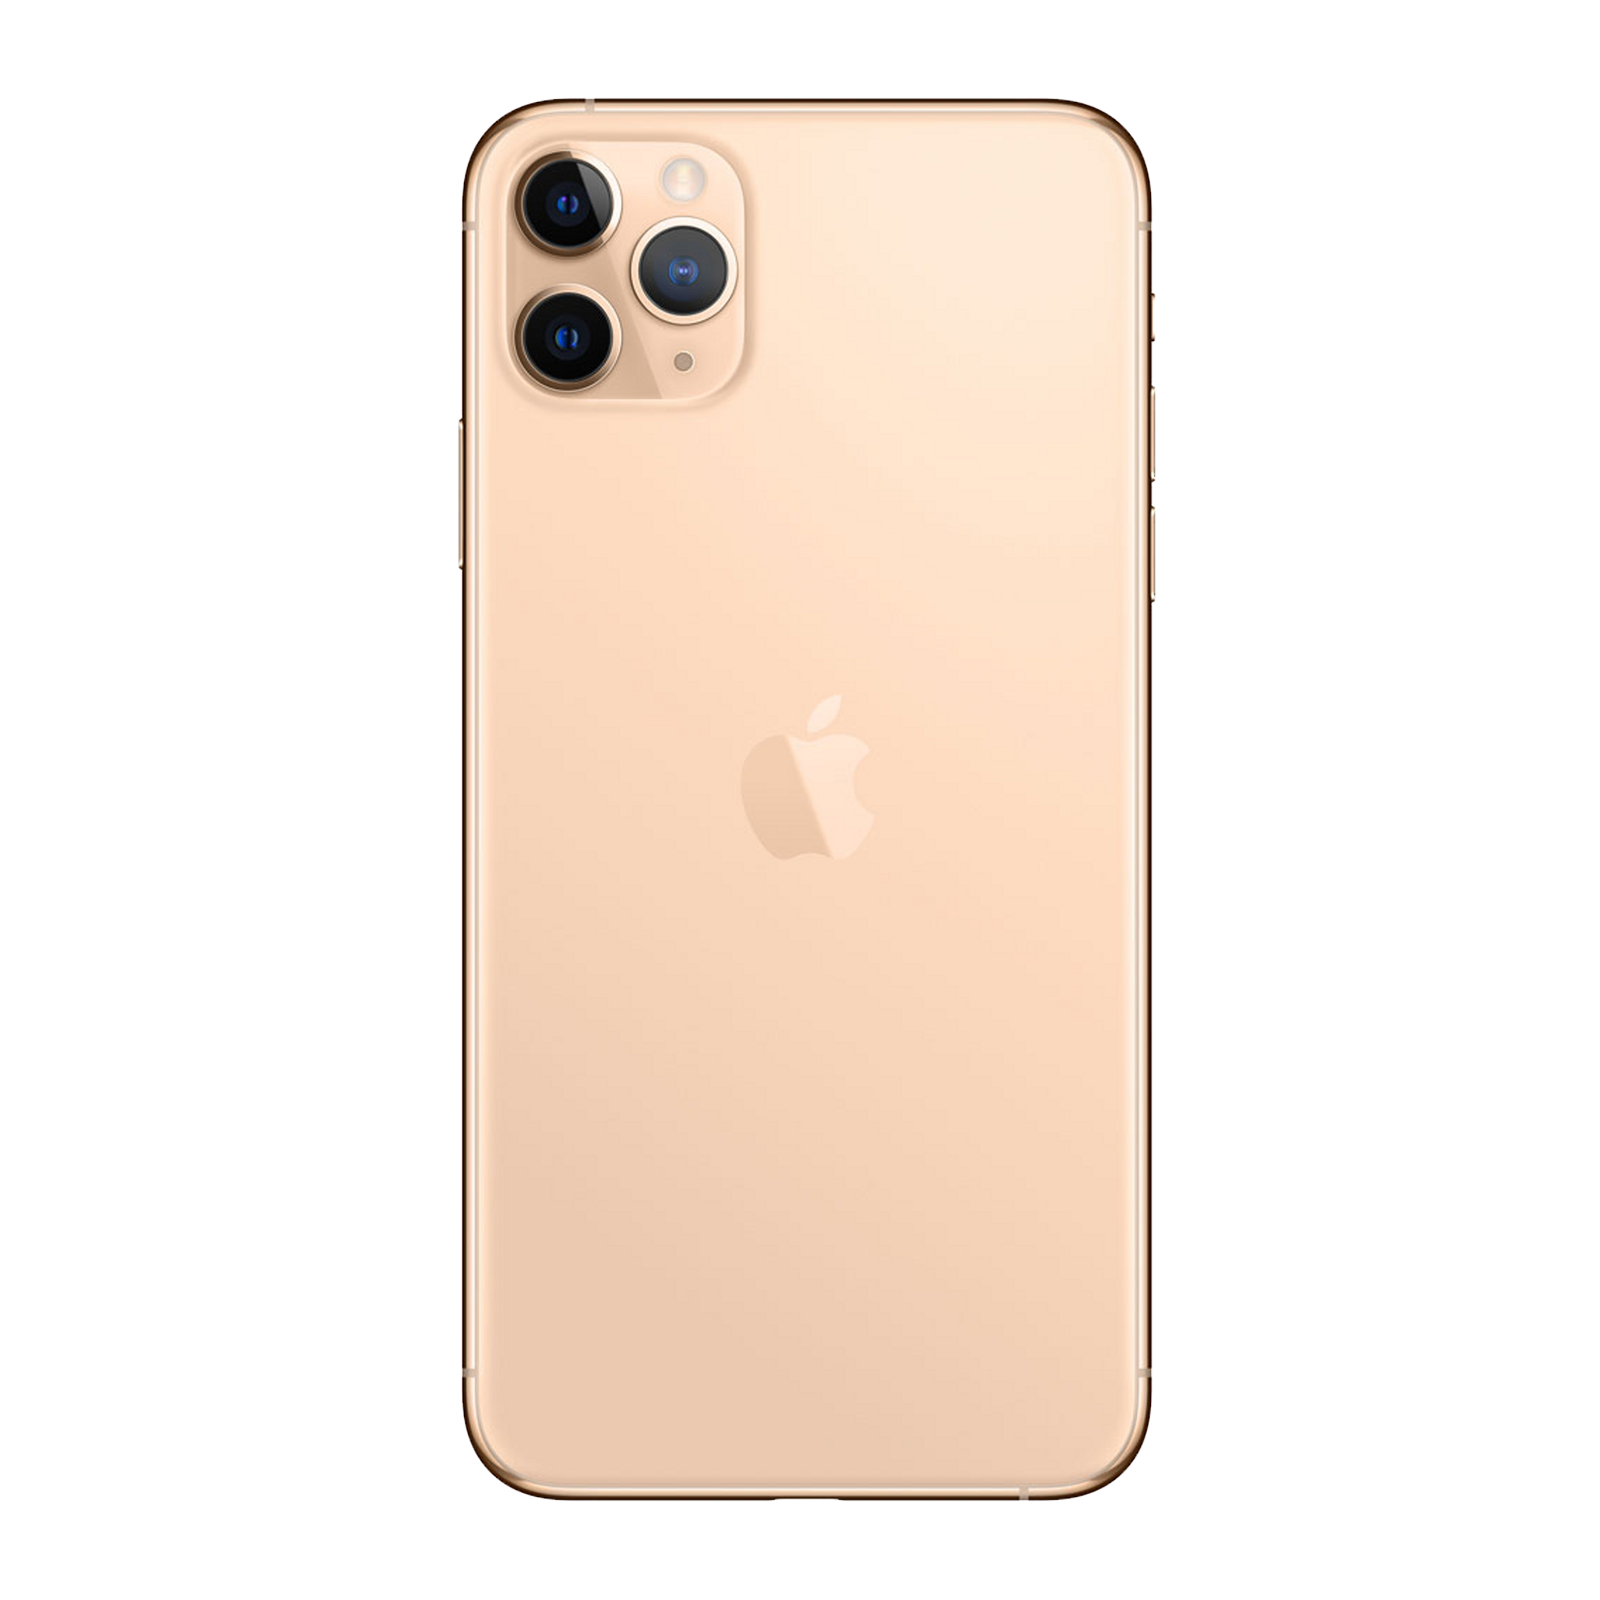 Apple iPhone 11 Pro Max 256GB Gold Very Good - T-Mobile